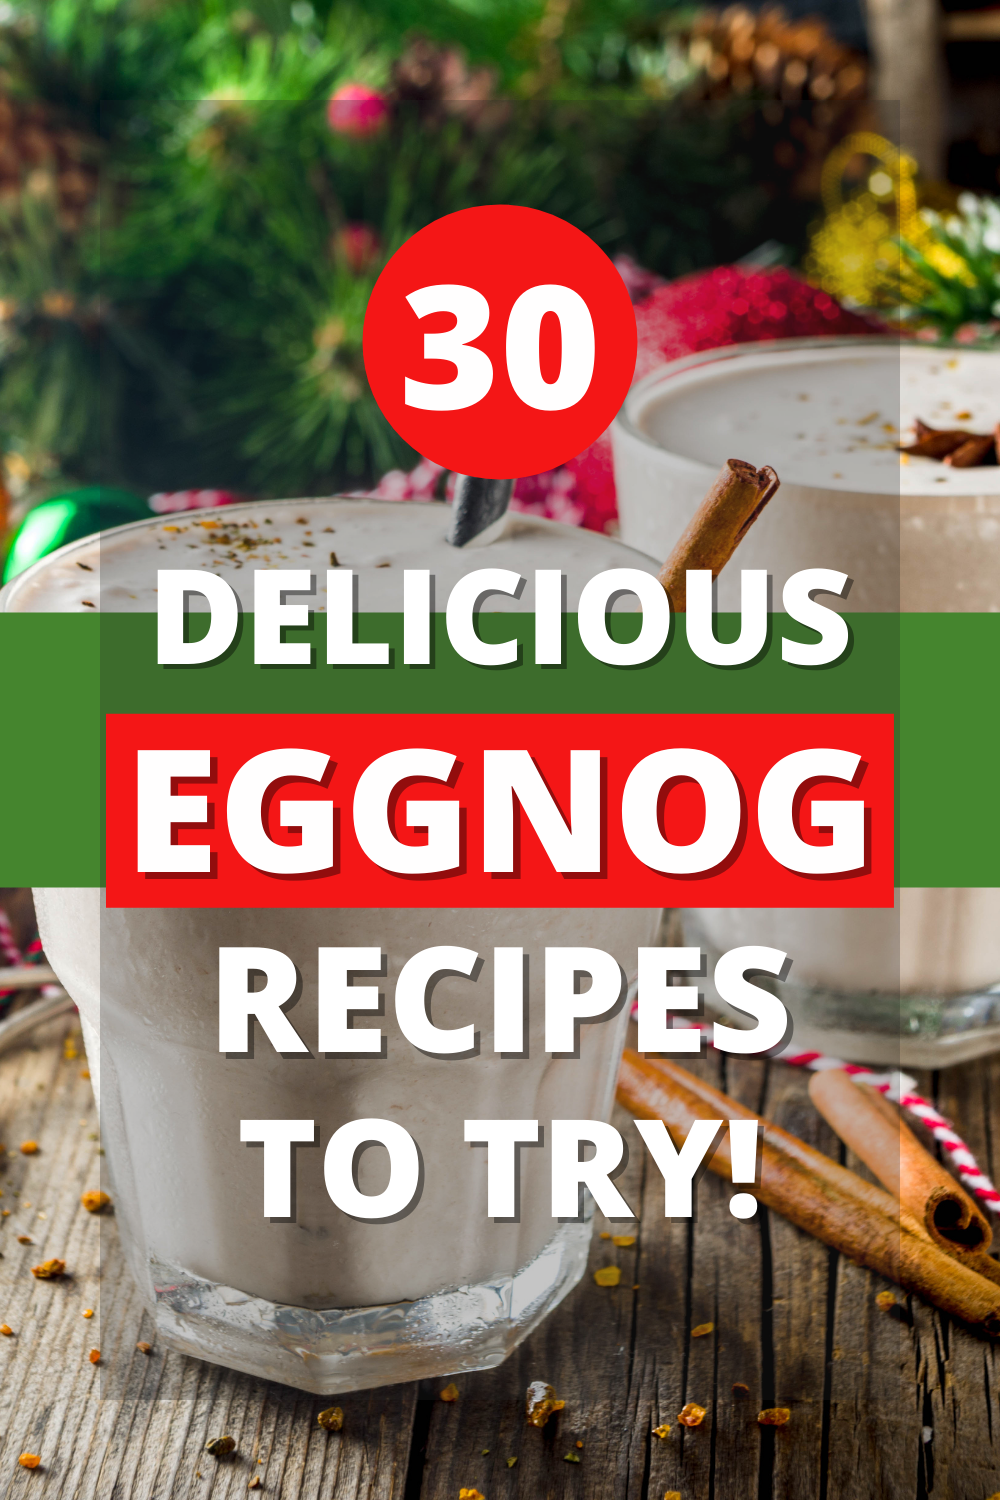 Pin showing the text 30 Delicious Eggnog Recipes to Try! with a background image of eggnog